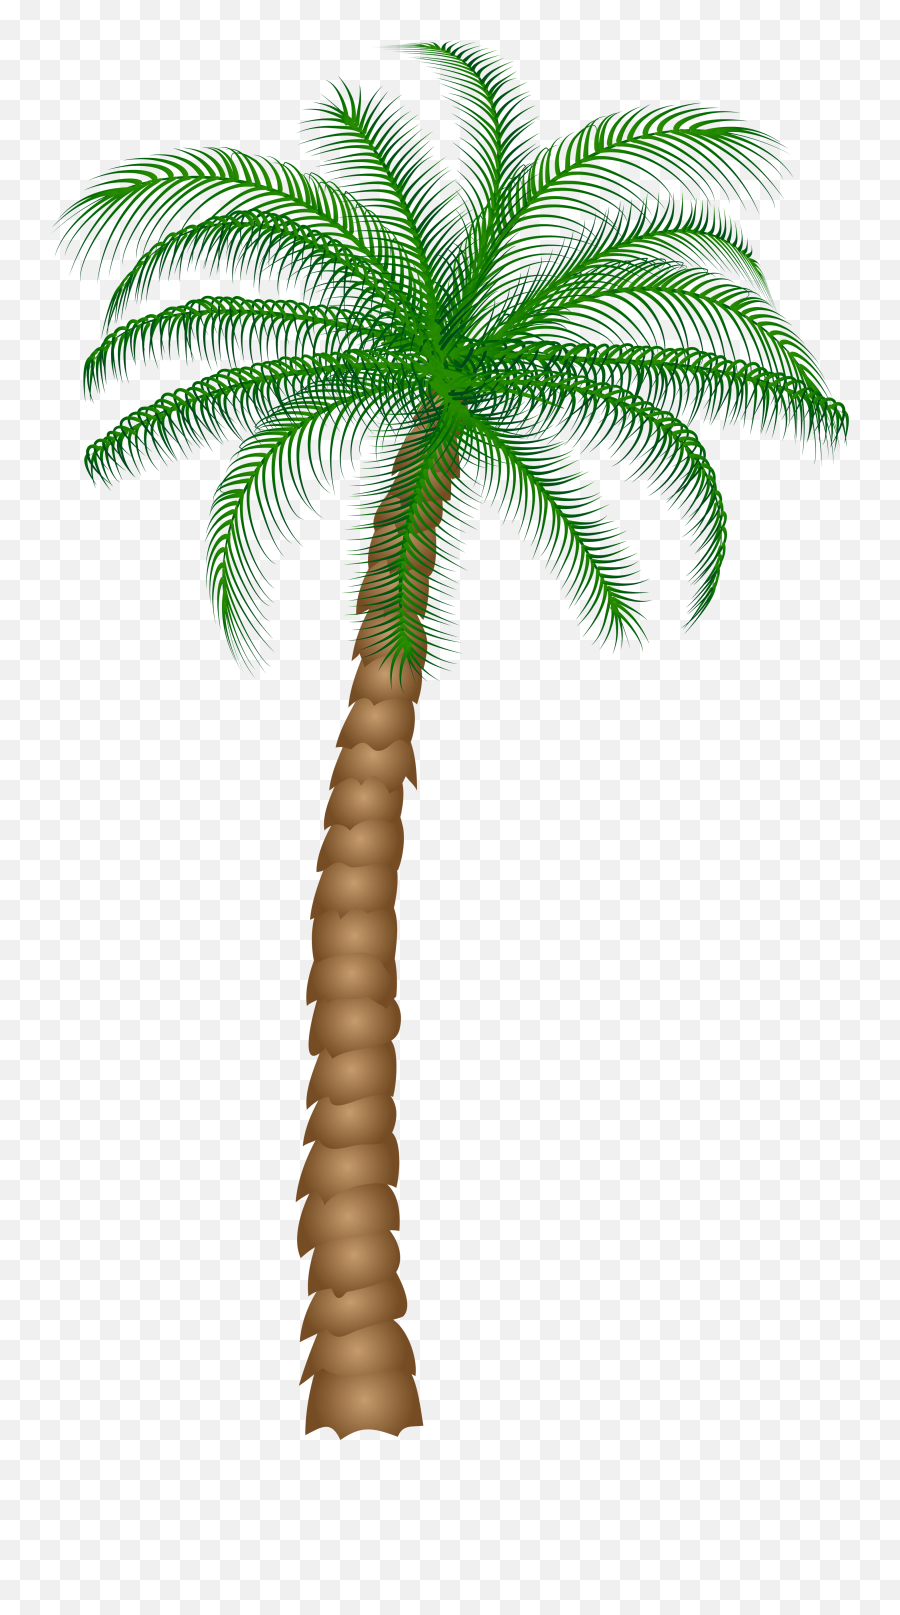 Palm Tree Png Clipart - Real Palm Tree Png Transparent Emoji,Palm Tree Png